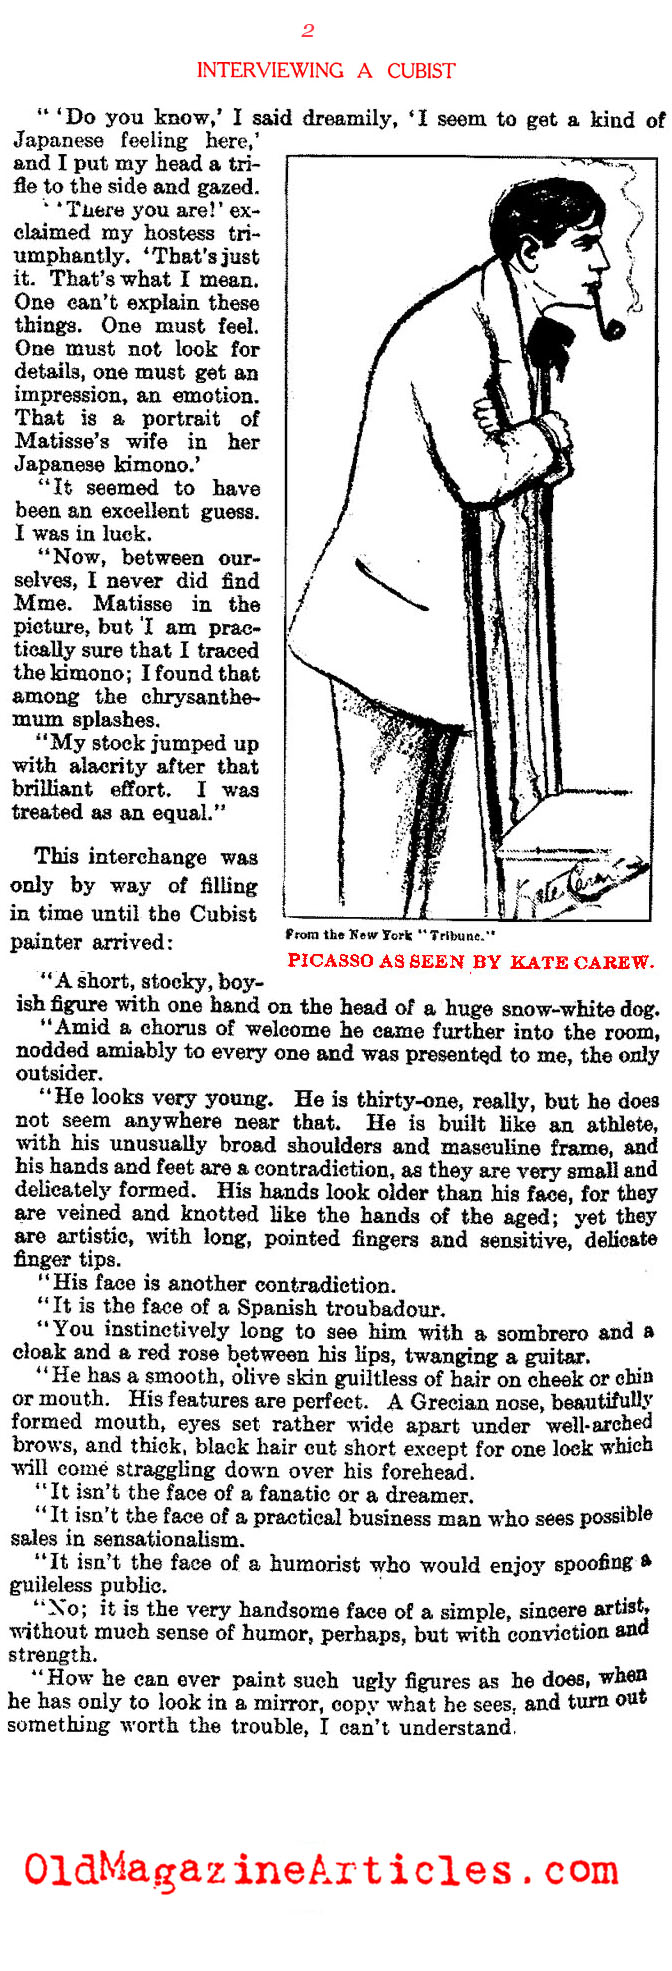 The Lampooning of Picasso  (Literary Digest, 1913)